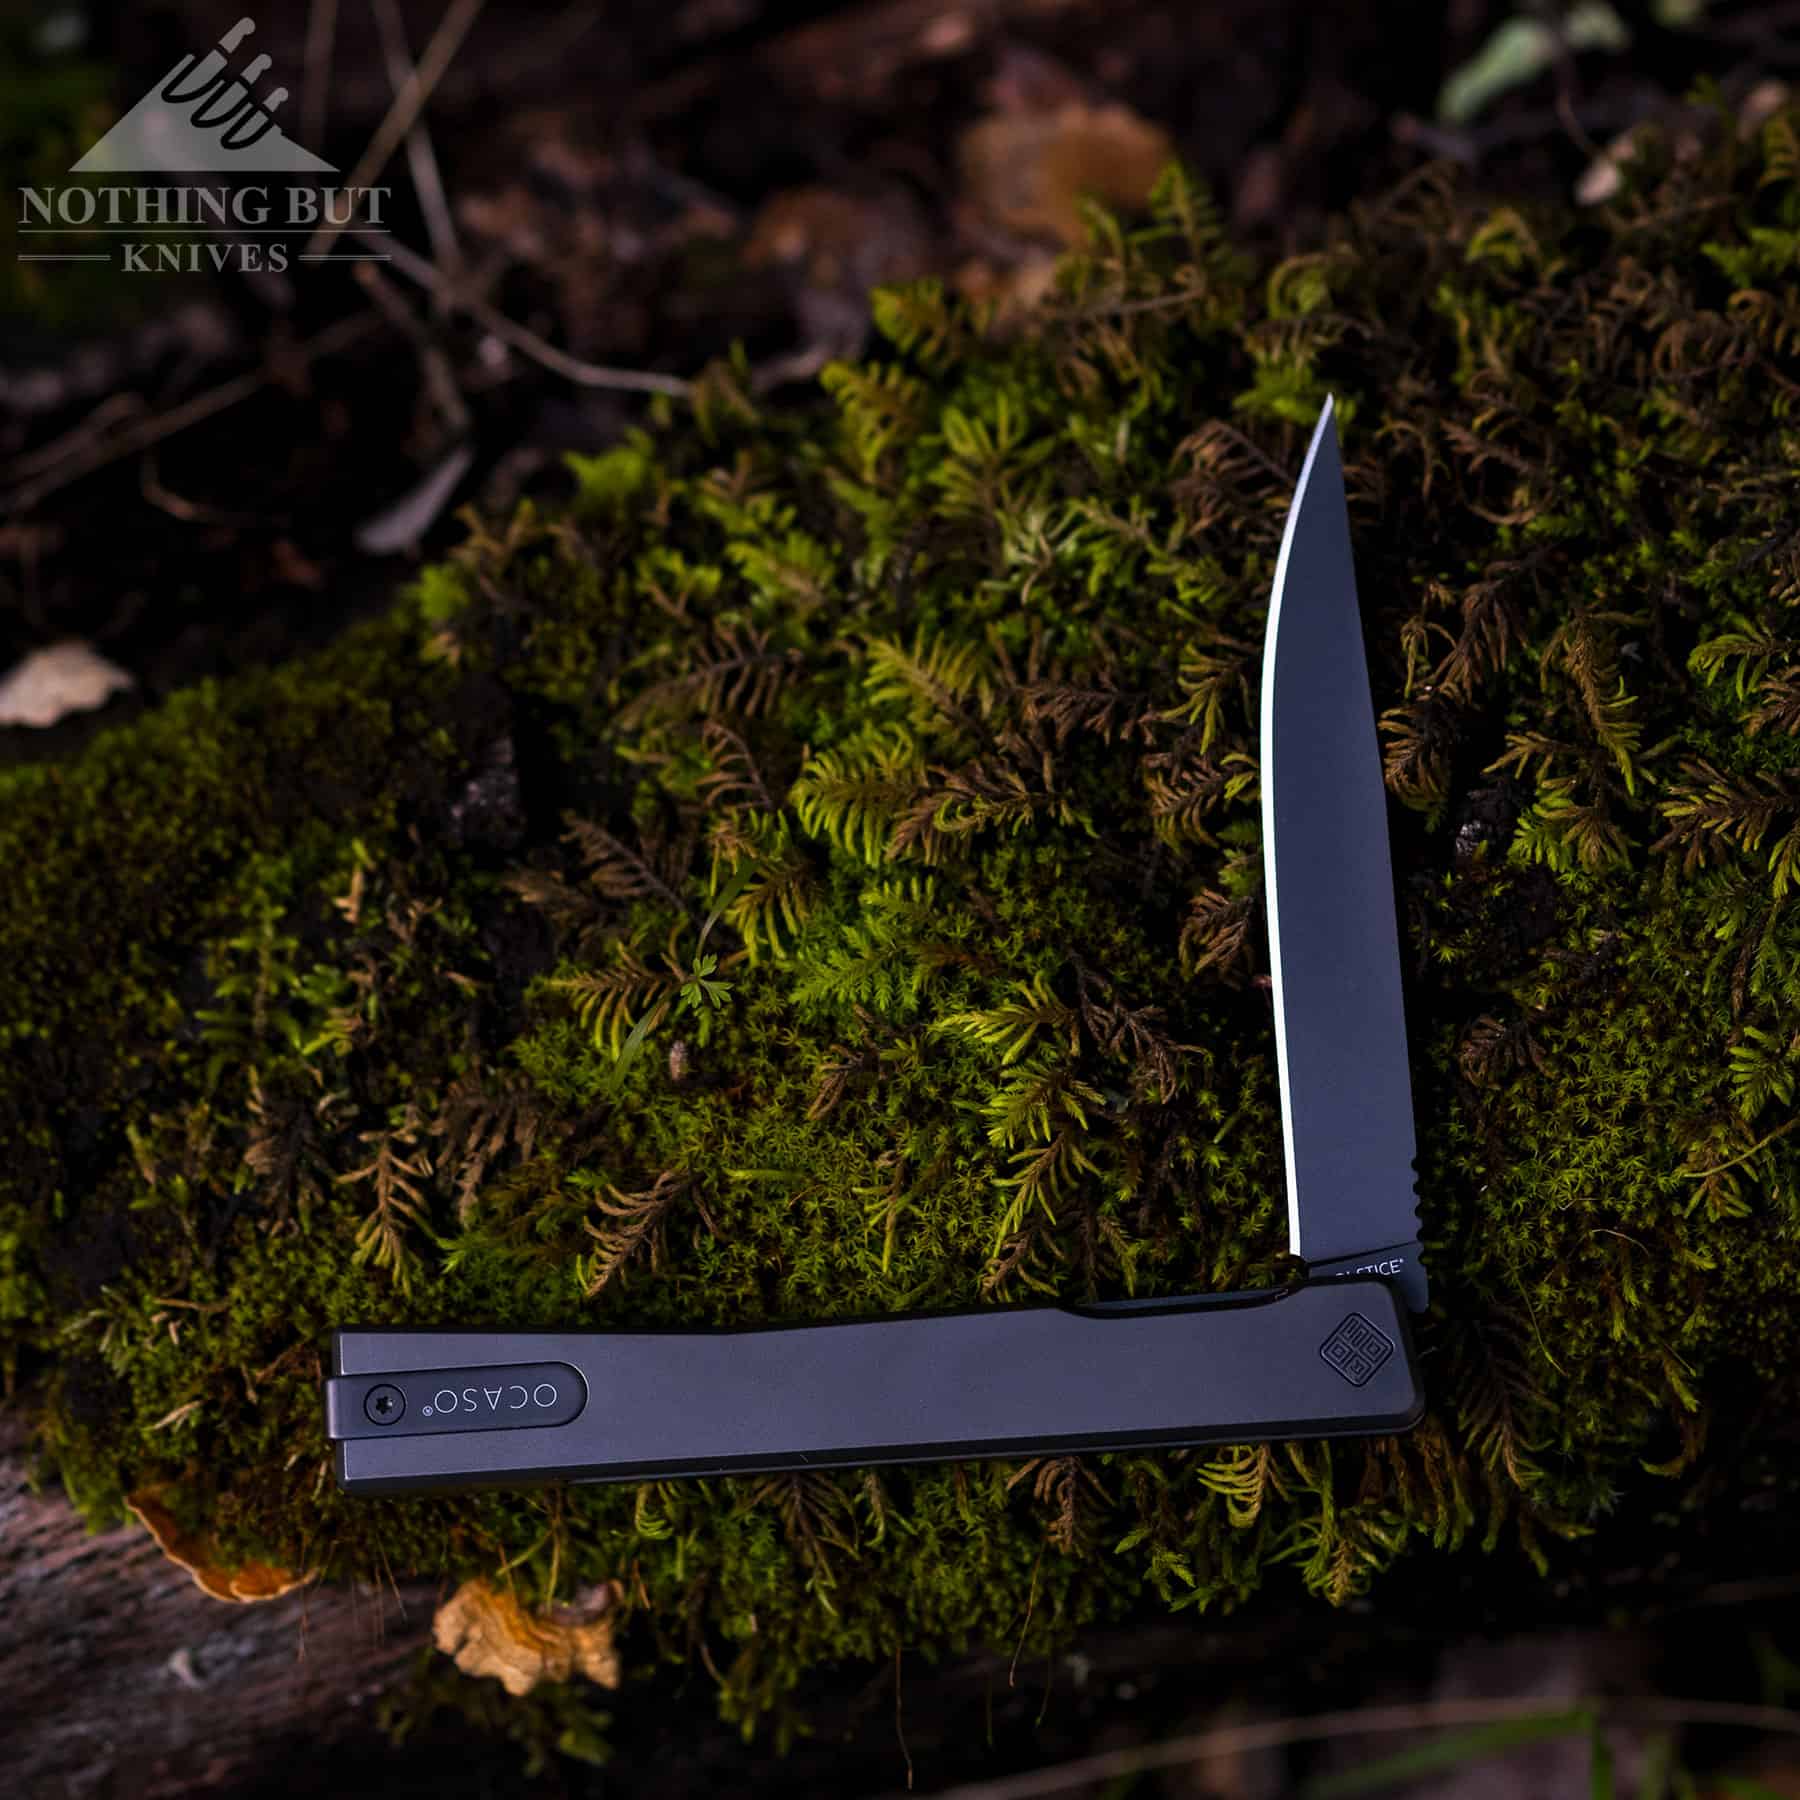 The all black carben fiber version of the Ocaso Solstice is a sleek looking pocket knife.